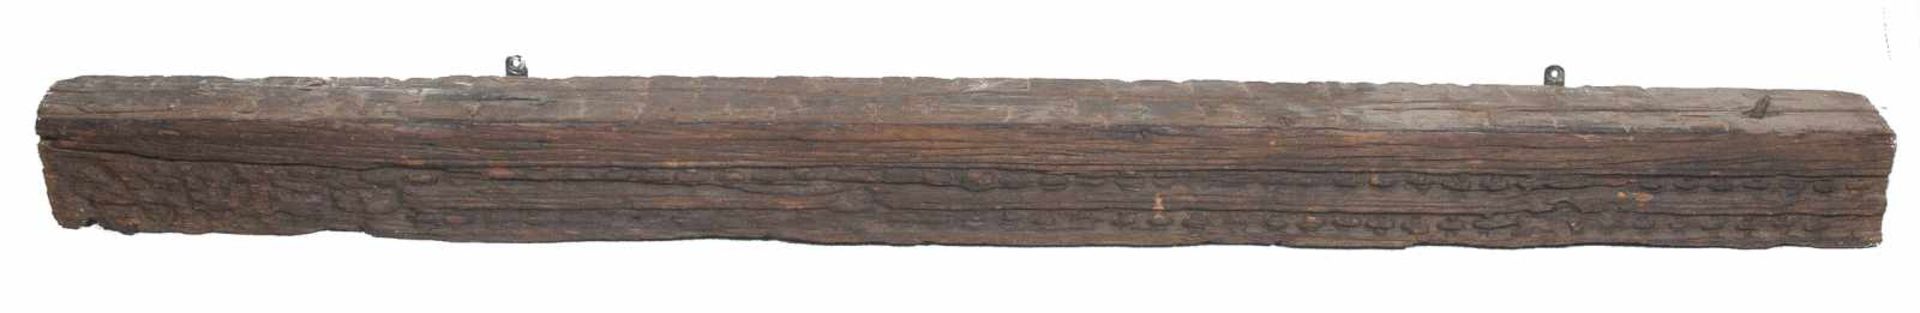 Lot of three carved wooden beams. 17th – 18th century. 115 x 16 x 8 cm., 112 x 19 x 12 cm, and 220 x - Image 3 of 6